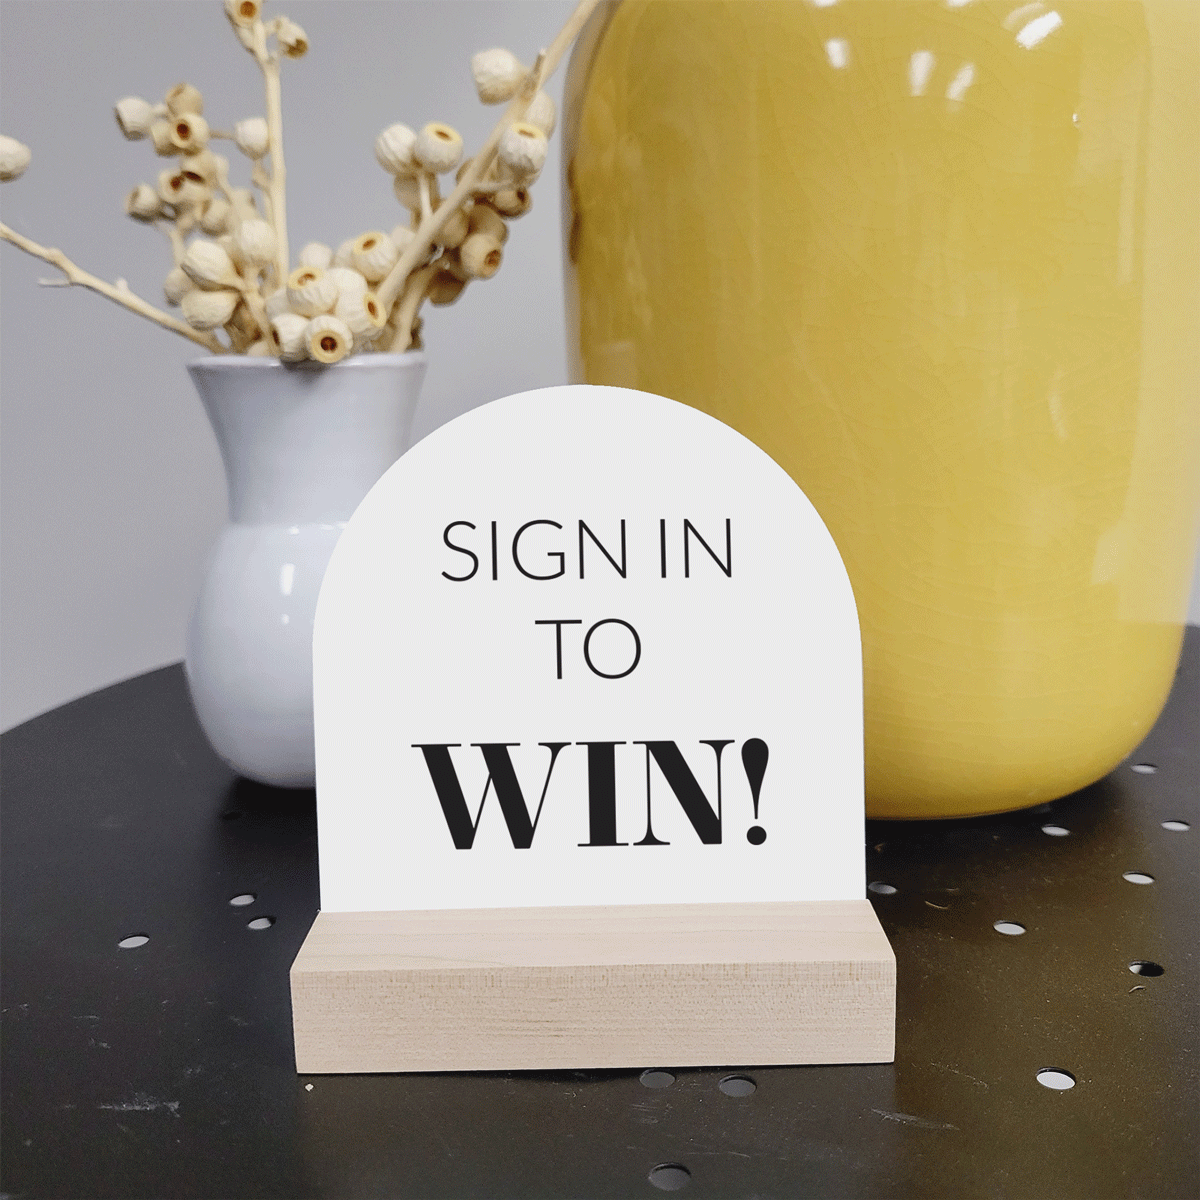 4x4 Arched Sign - Sign In to WIN!